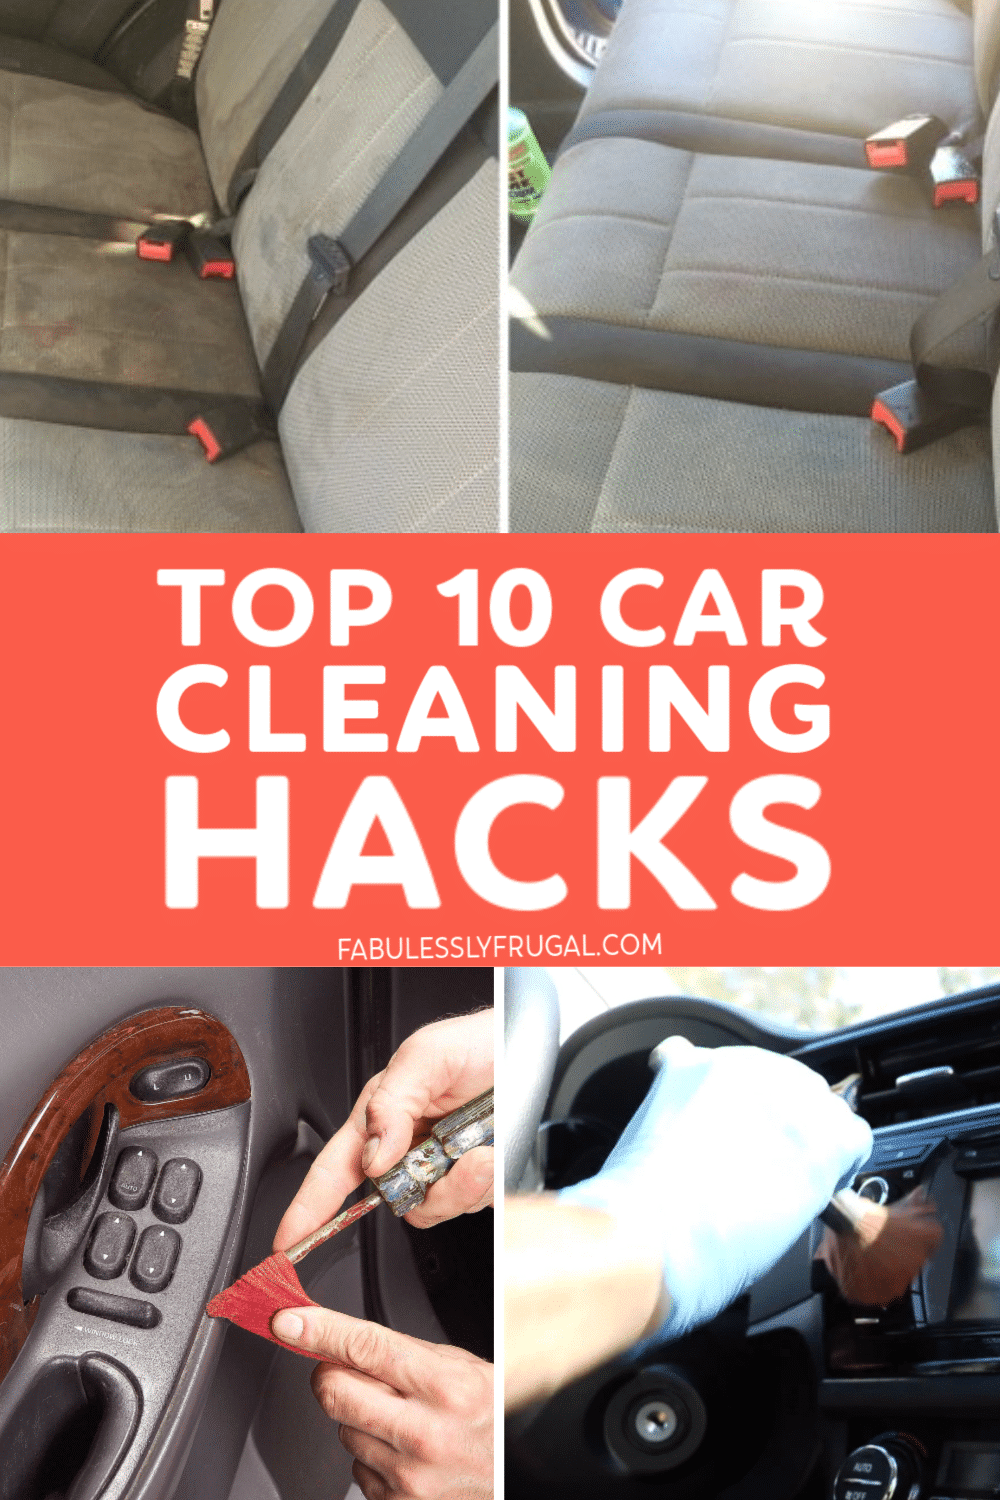 Car cleaning hacks